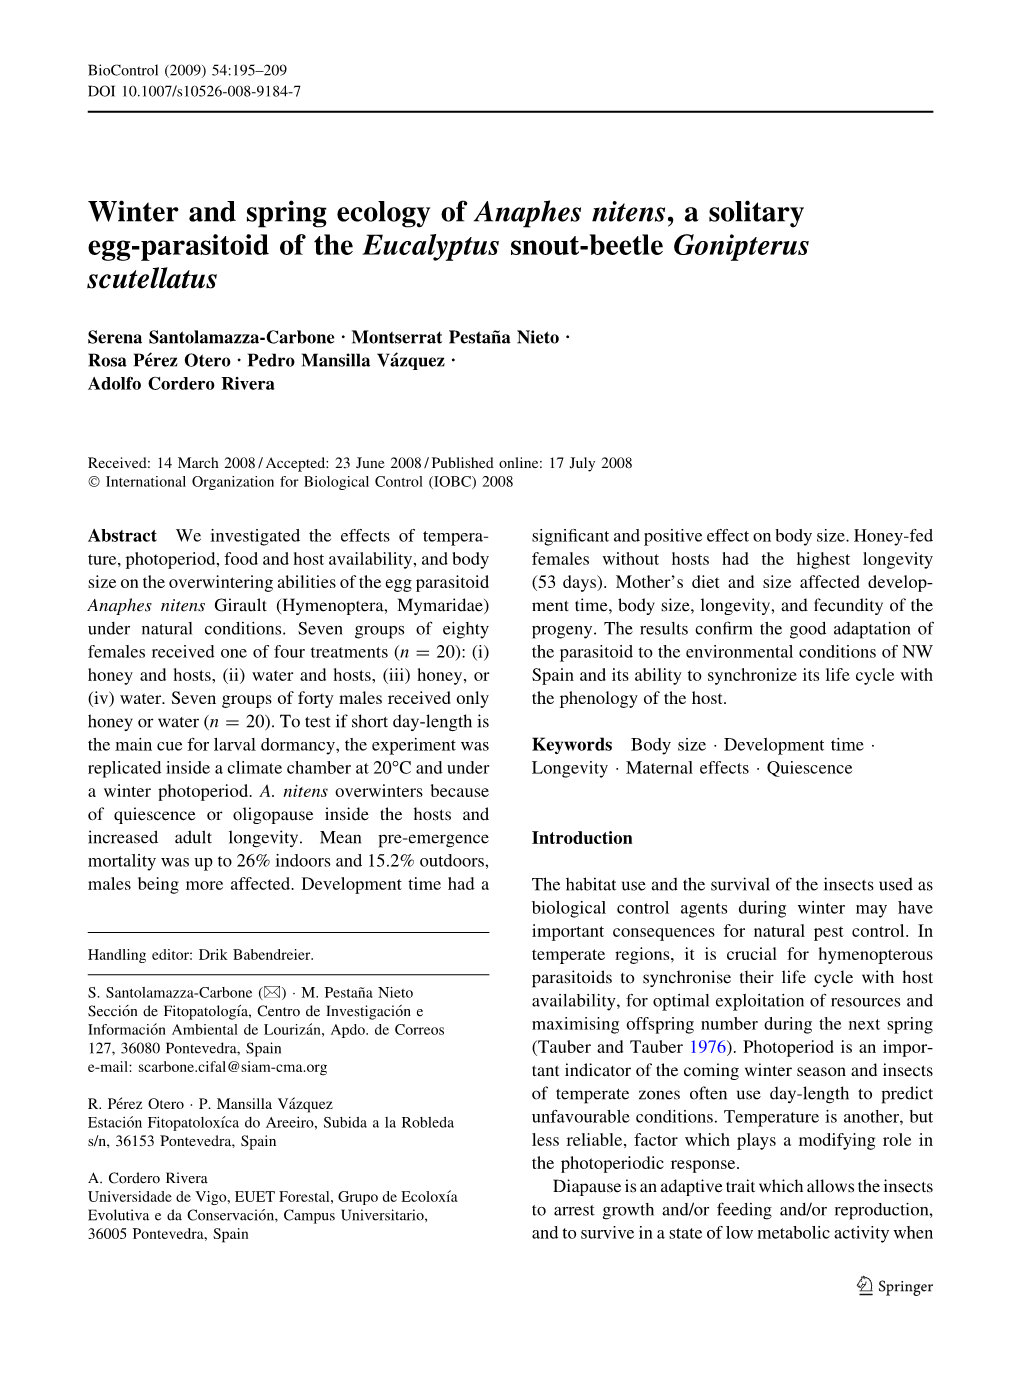 Winter and Spring Ecology of Anaphes Nitens, a Solitary Egg-Parasitoid of the Eucalyptus Snout-Beetle Gonipterus Scutellatus